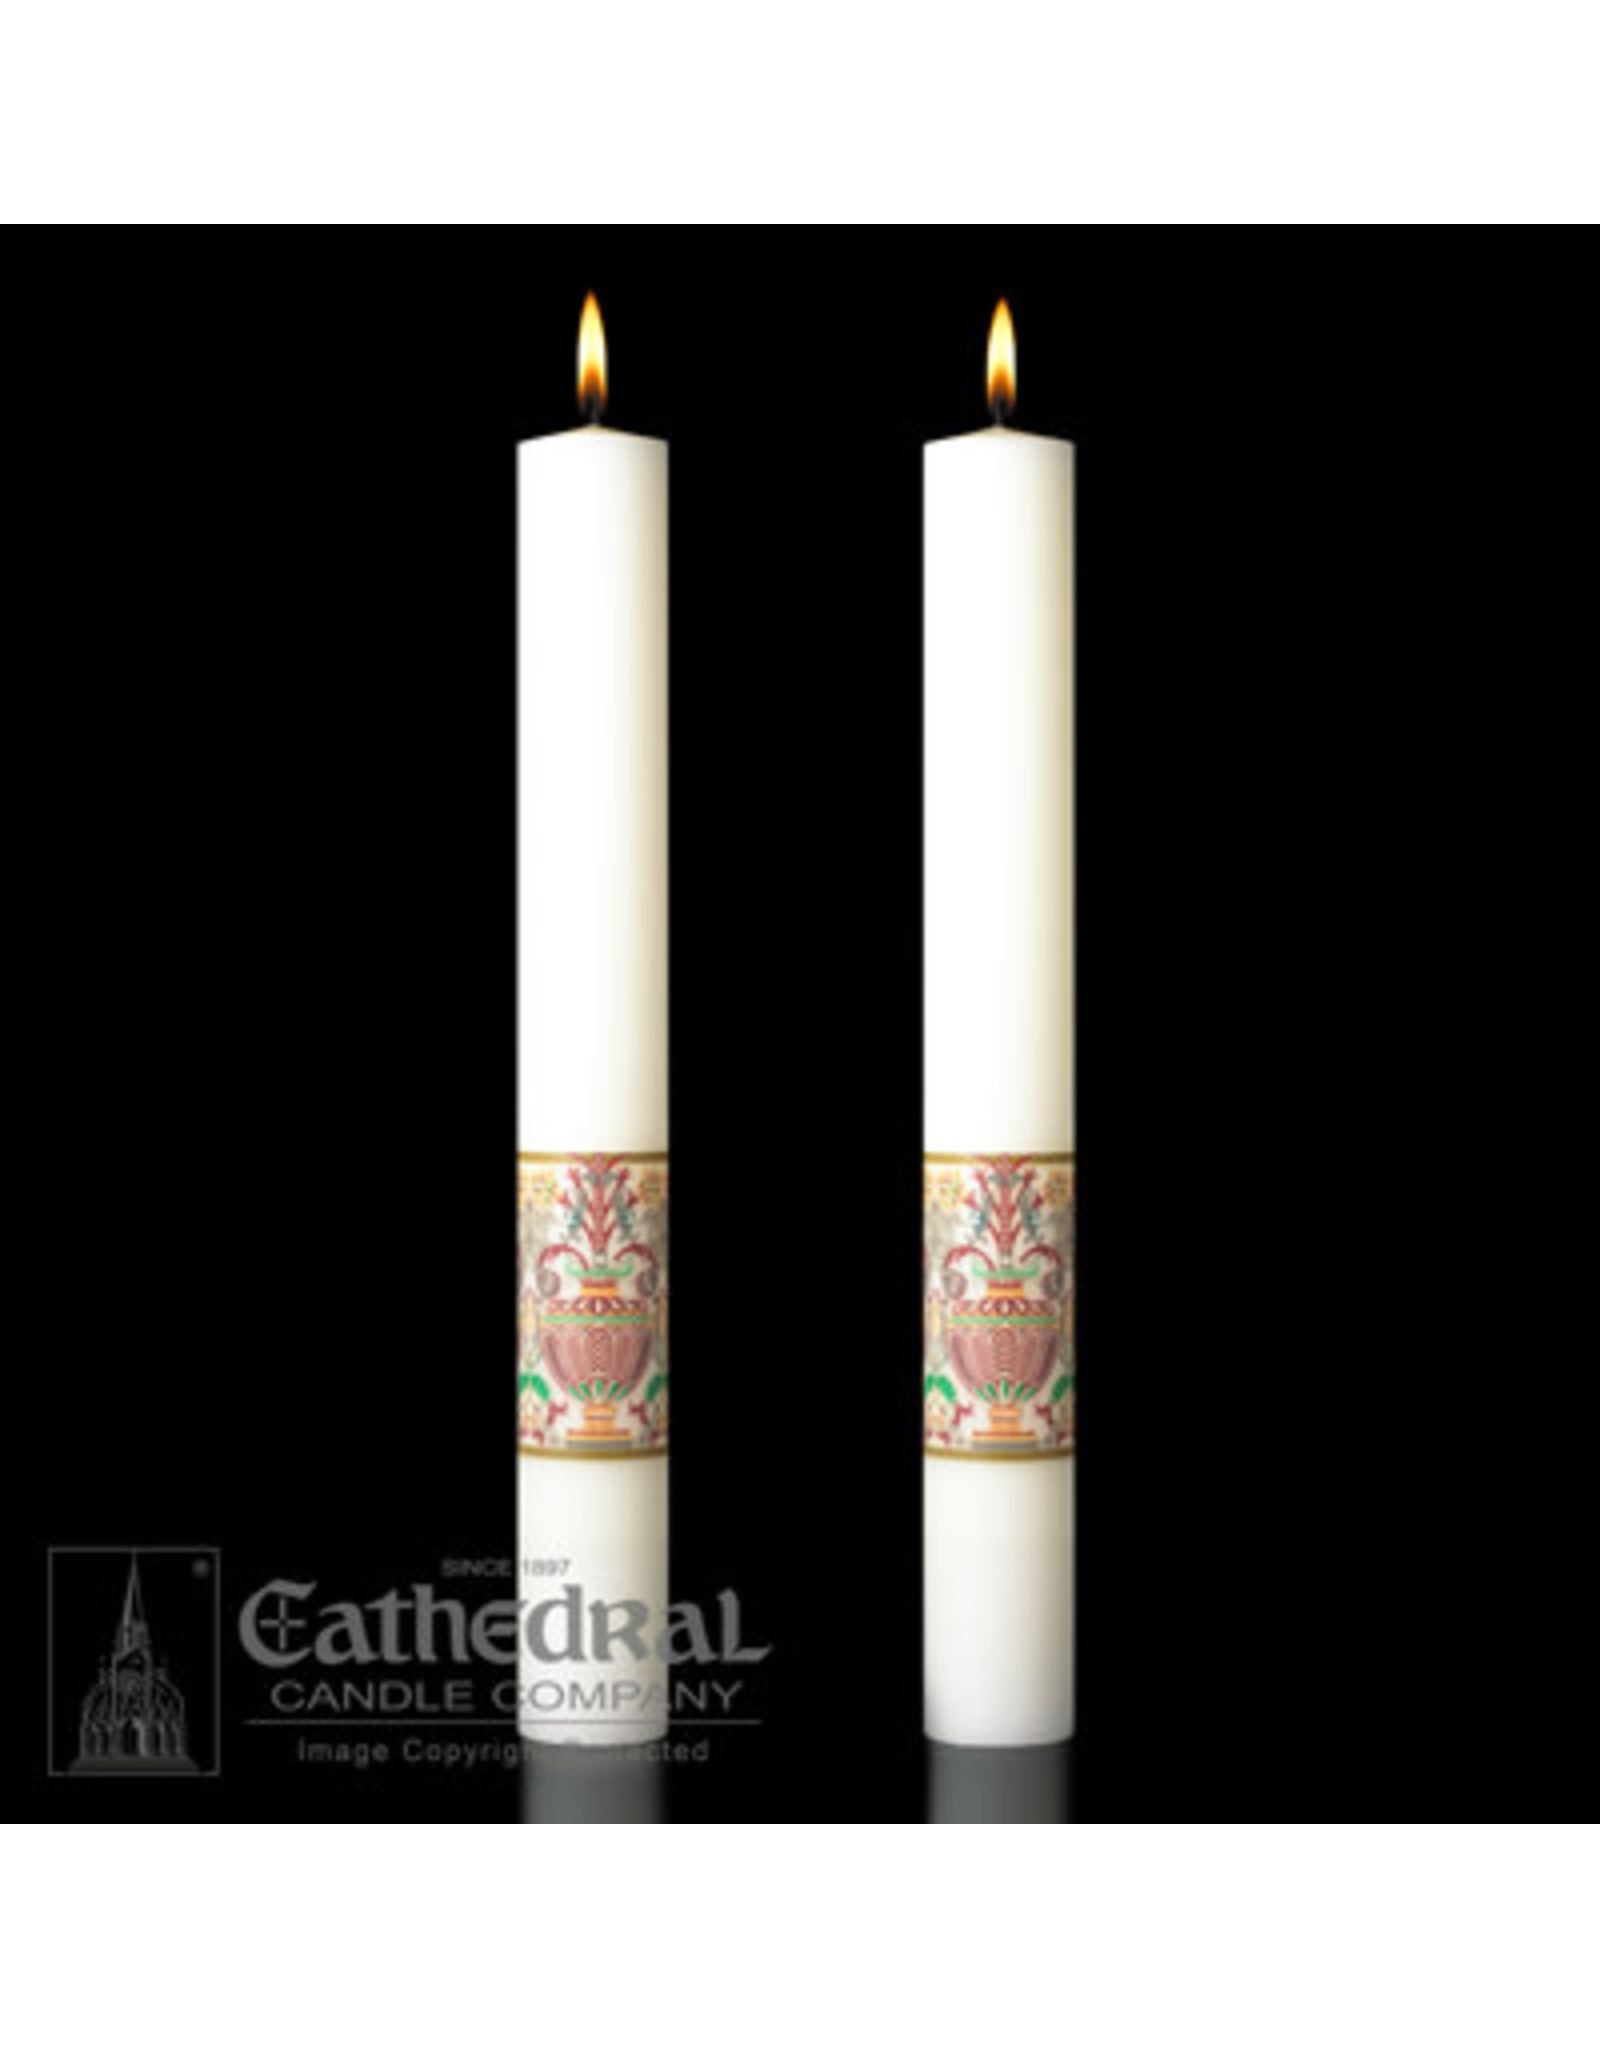 Investiture Paschal Candle